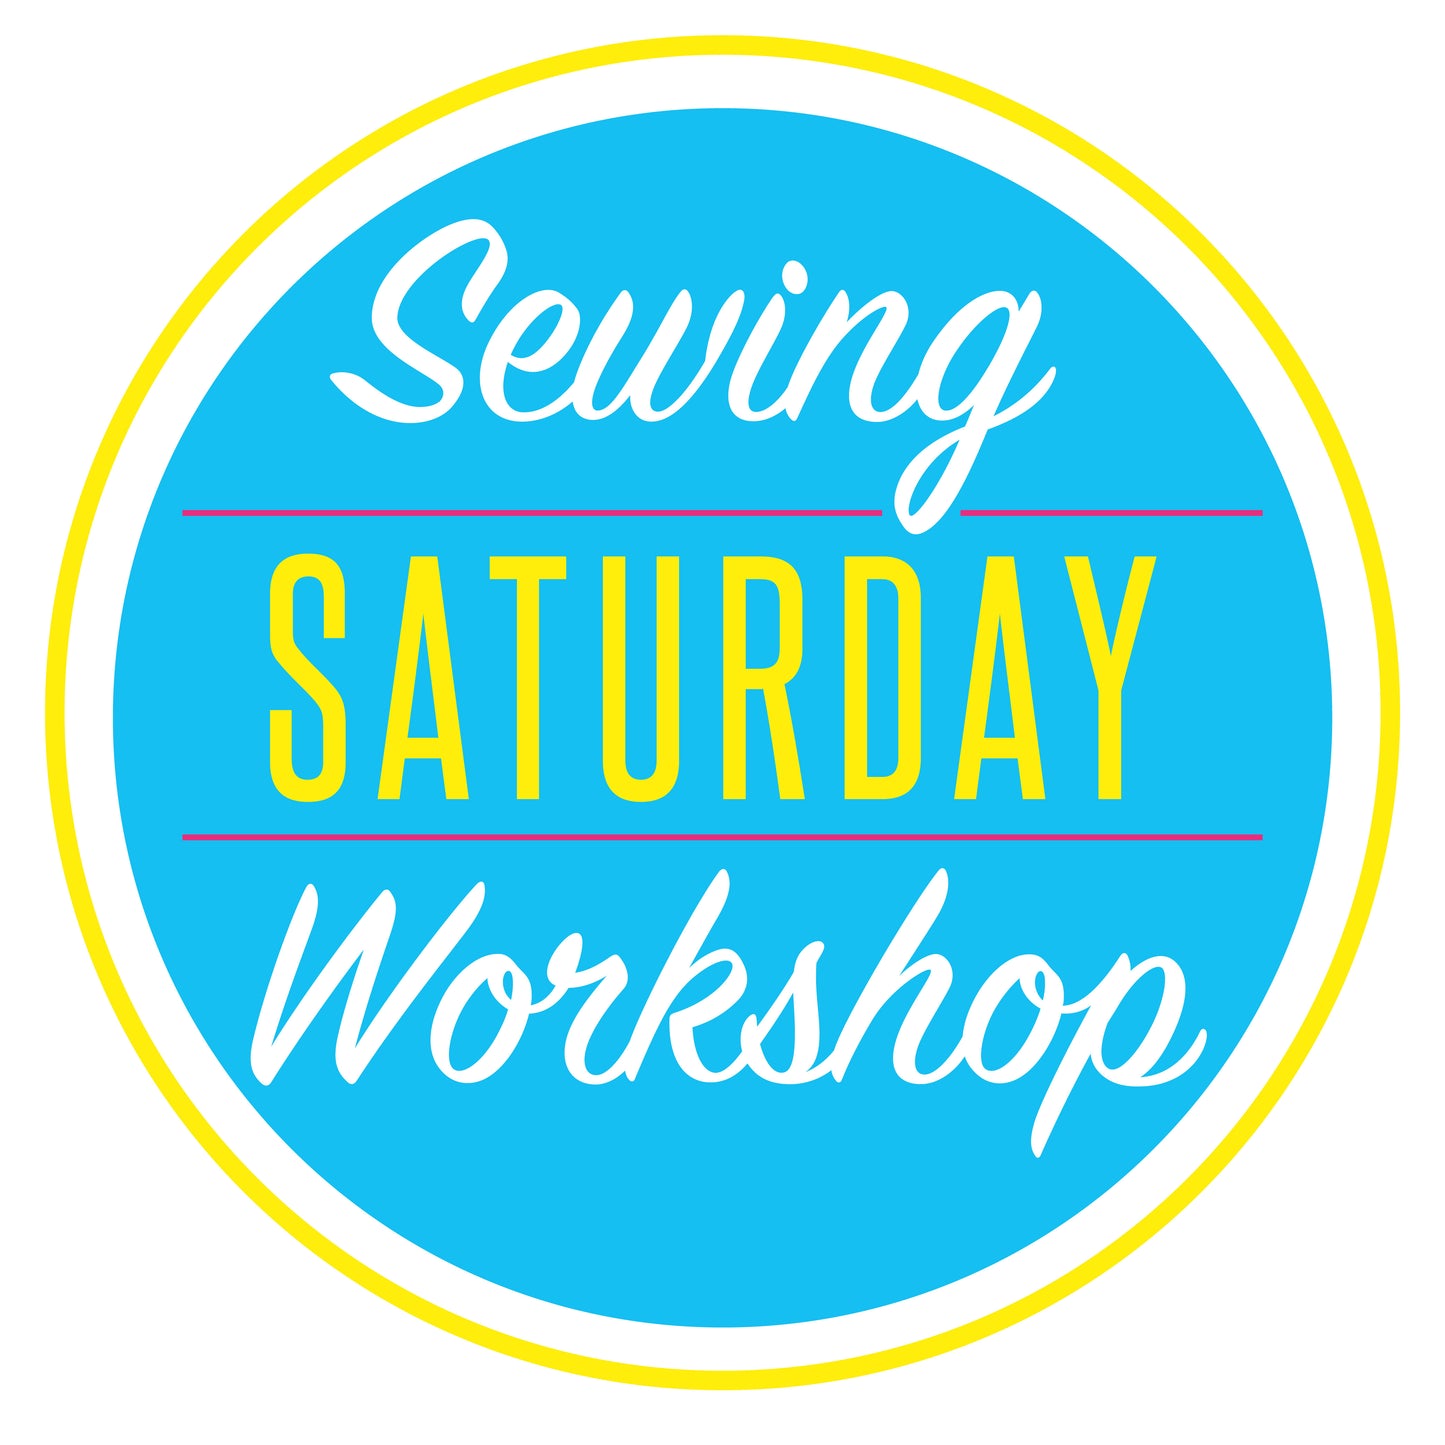 Sewing Workshop: Saturday, August 10, 9am-3pm